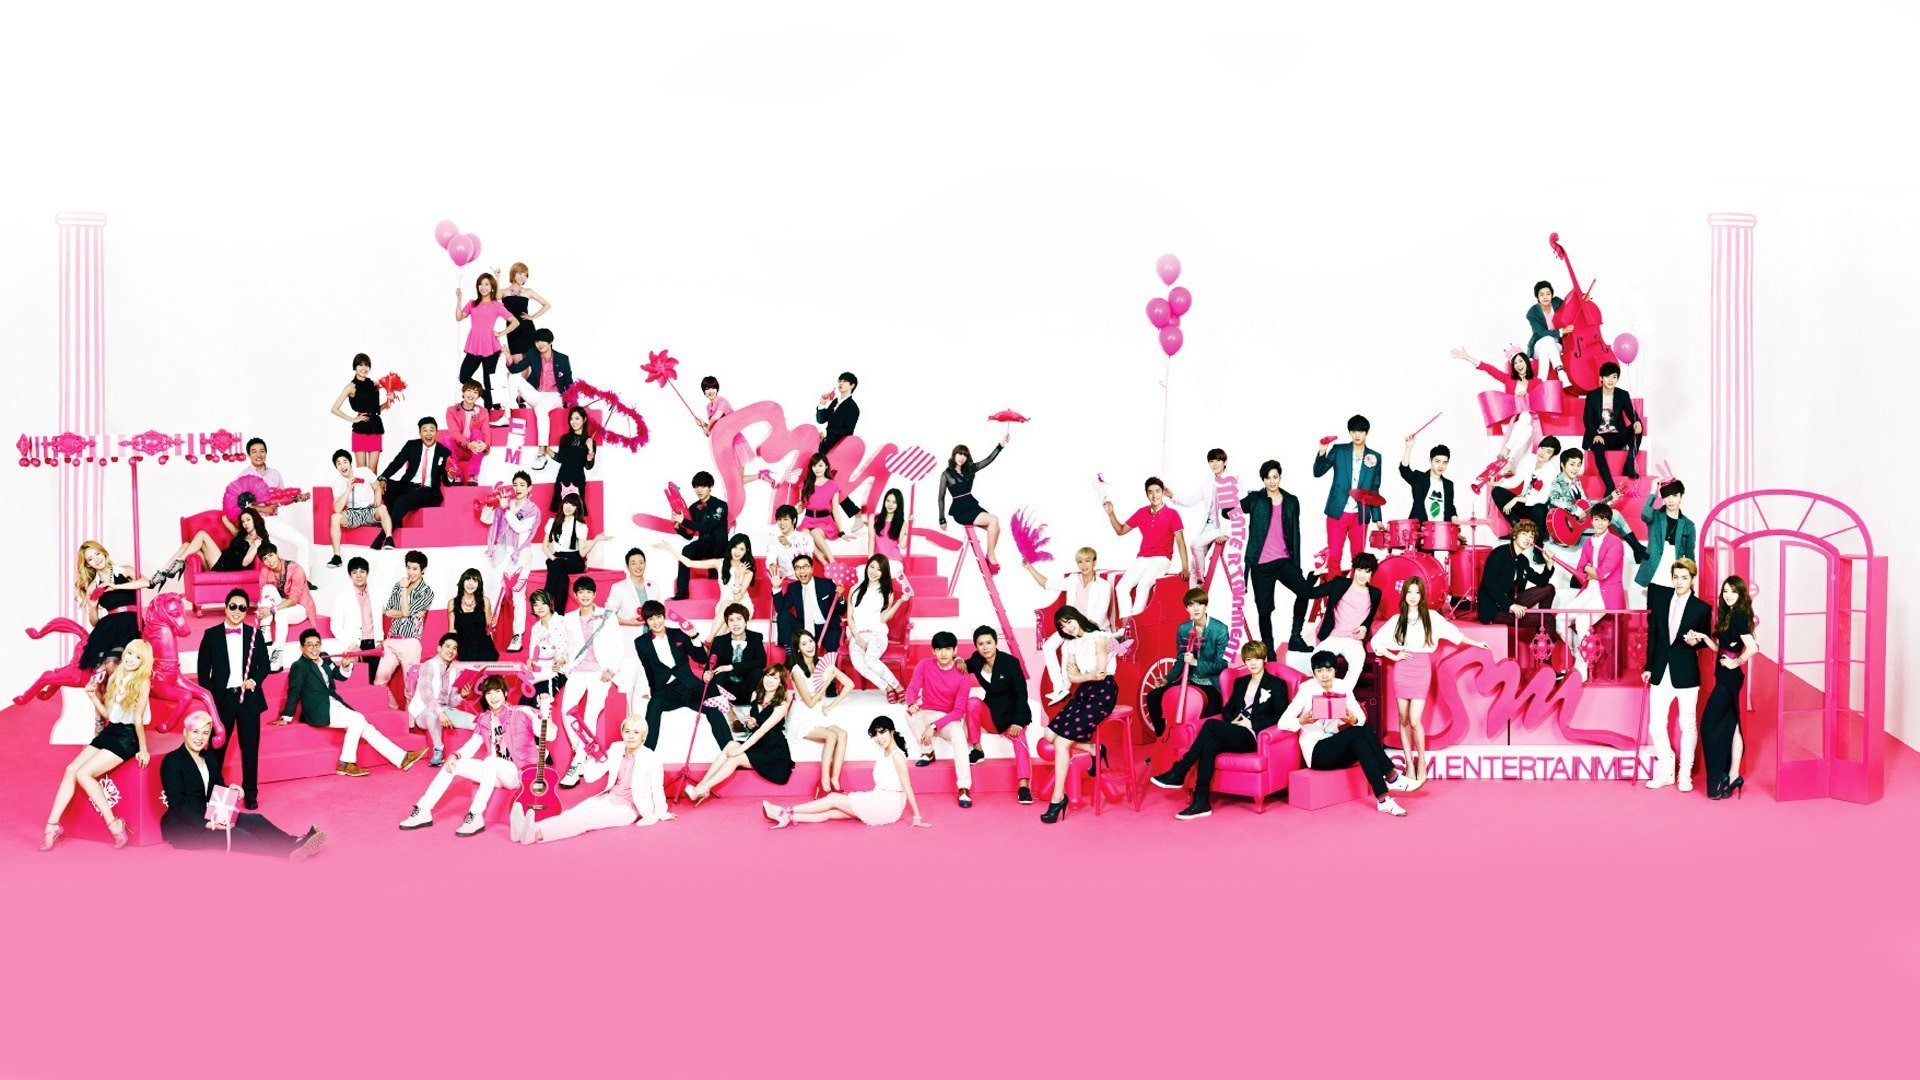 1920x1080 ... www hardwarezone com sg View Single Post Running Man fans who is